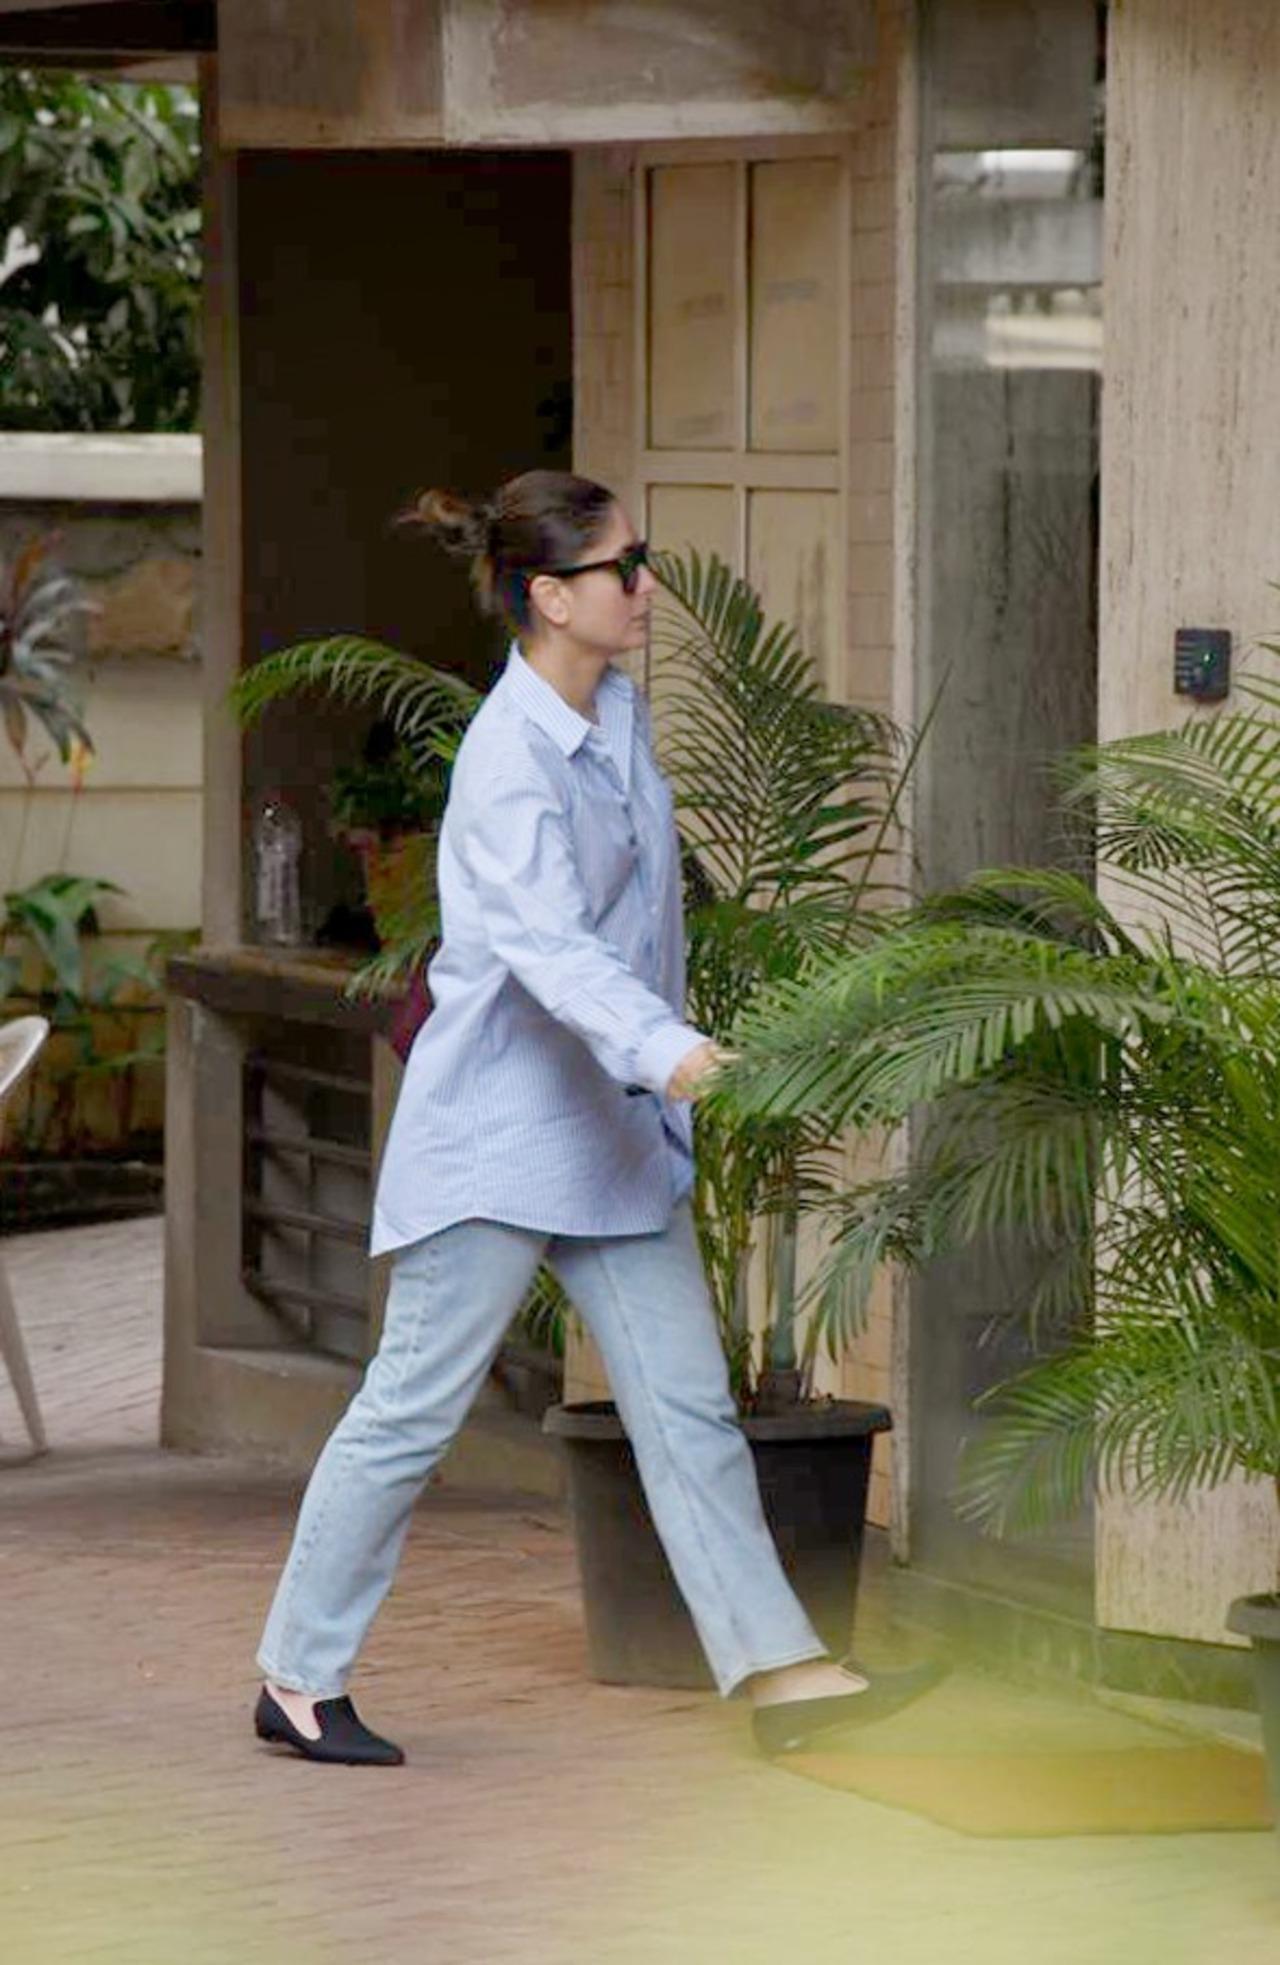 Kareena was dressed in a loose shirt and fitted pants